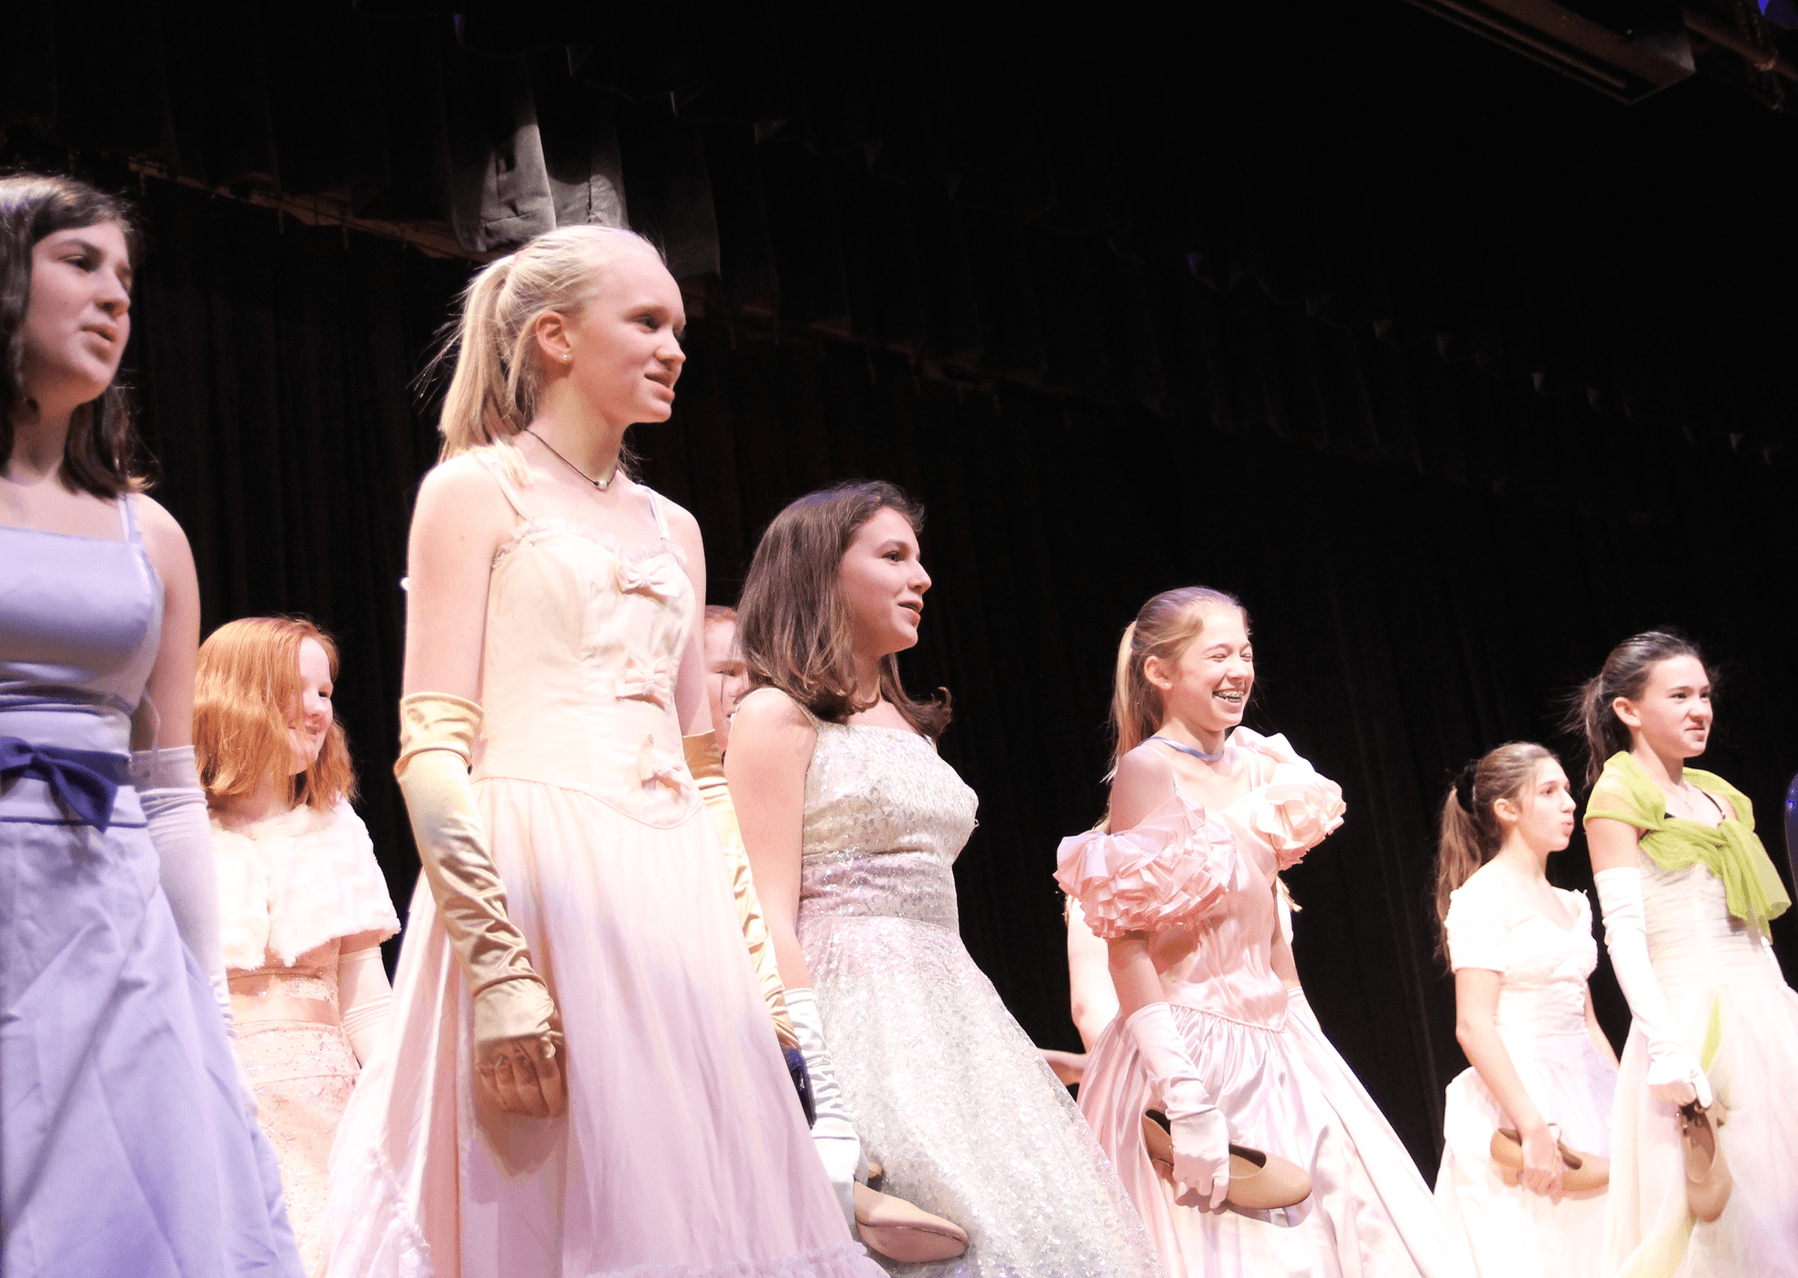 The Eastern Middle School 8th Grade Show Chorus held a dress rehearsal for their upcoming musical performance, “Cinderella” which runs from Thursday, January 18 through Saturday, January 20